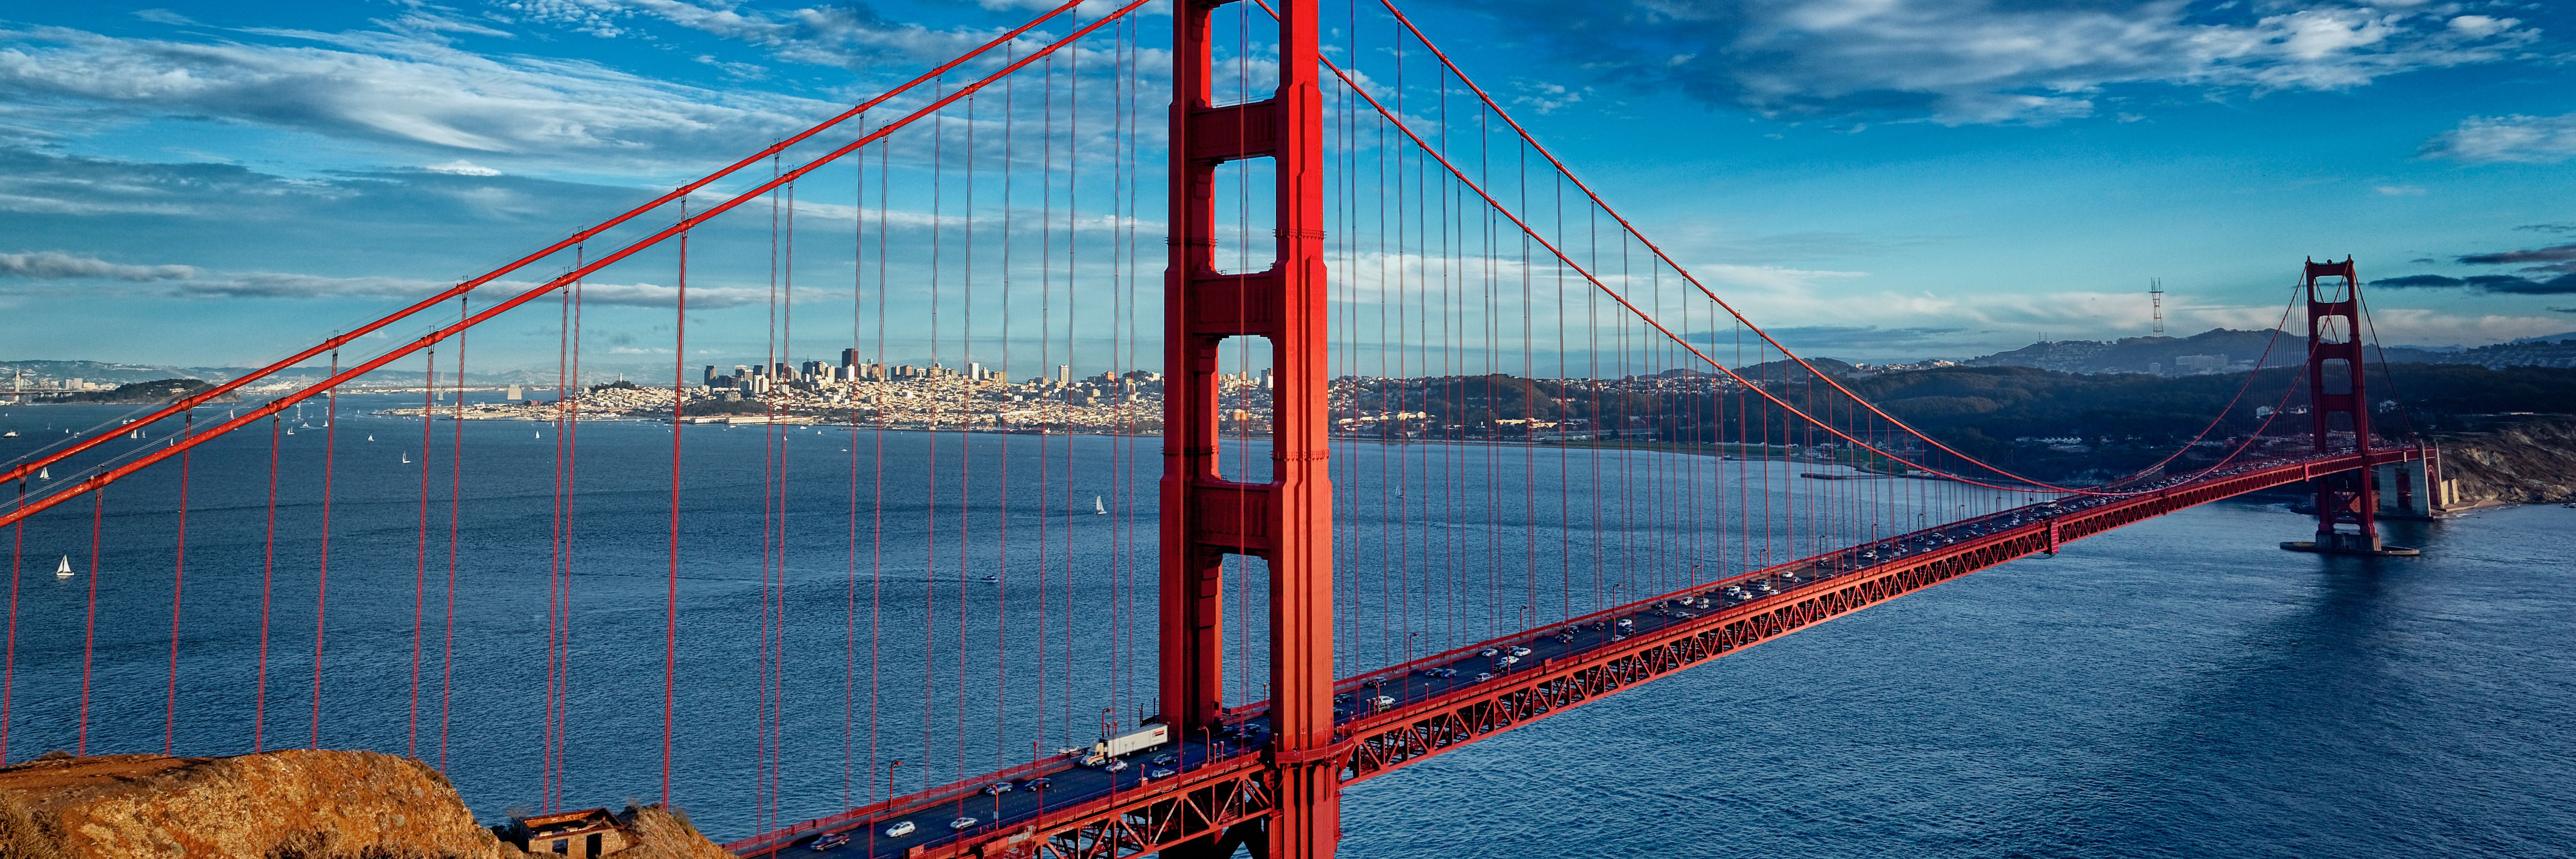 guided tours in san francisco